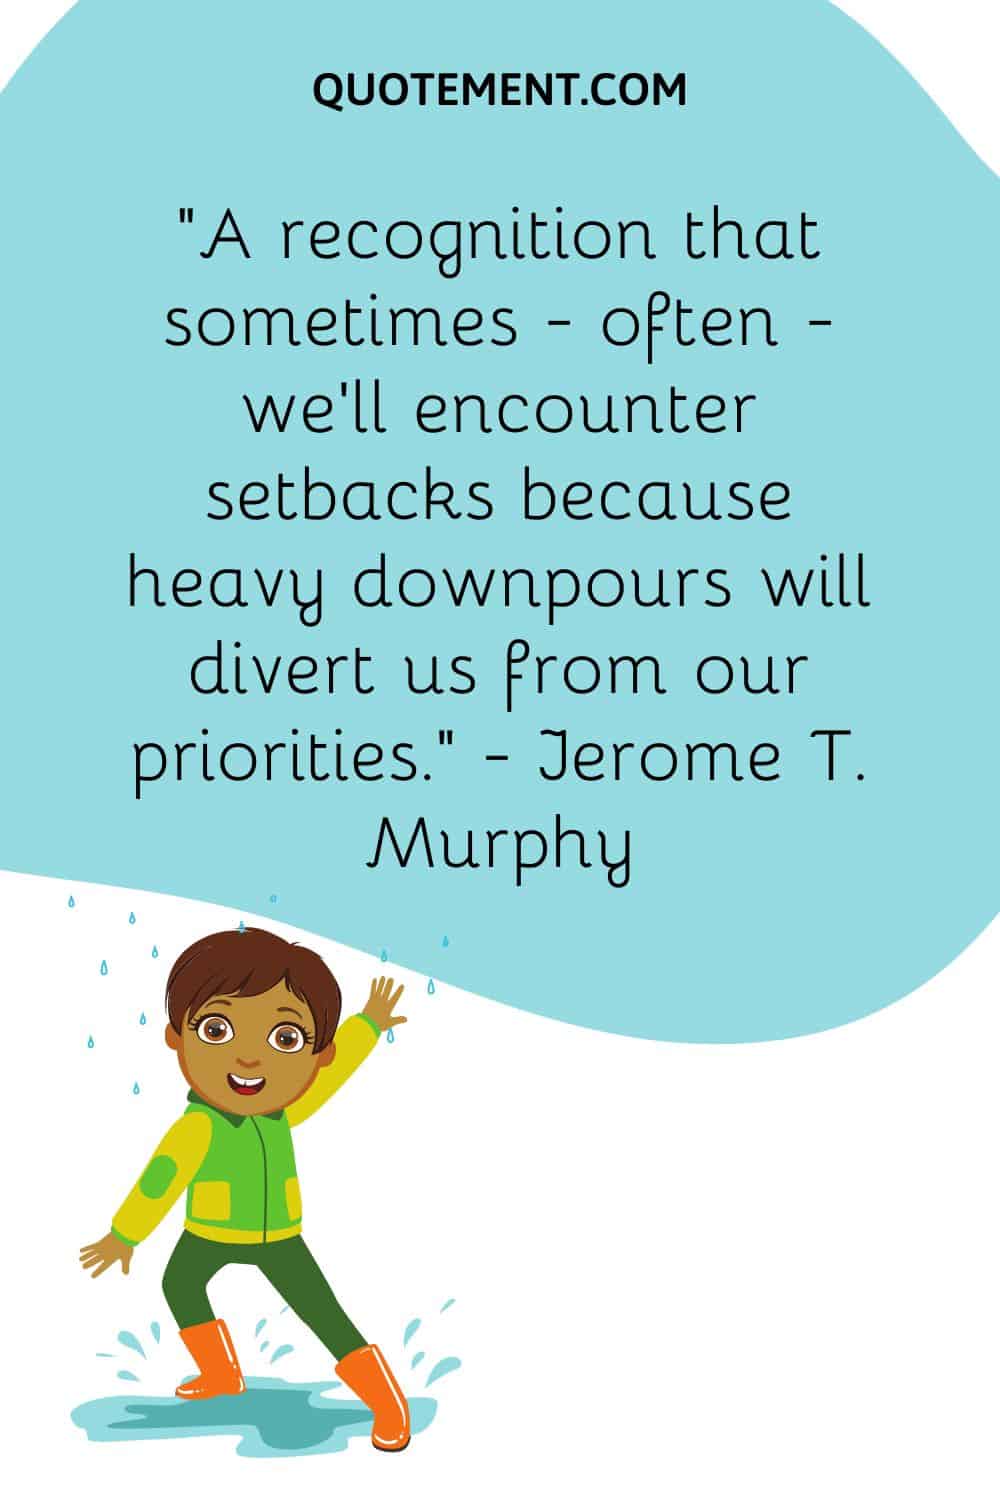 A recognition that sometimes— often — we’ll encounter setbacks because heavy downpours will divert us from our priorities